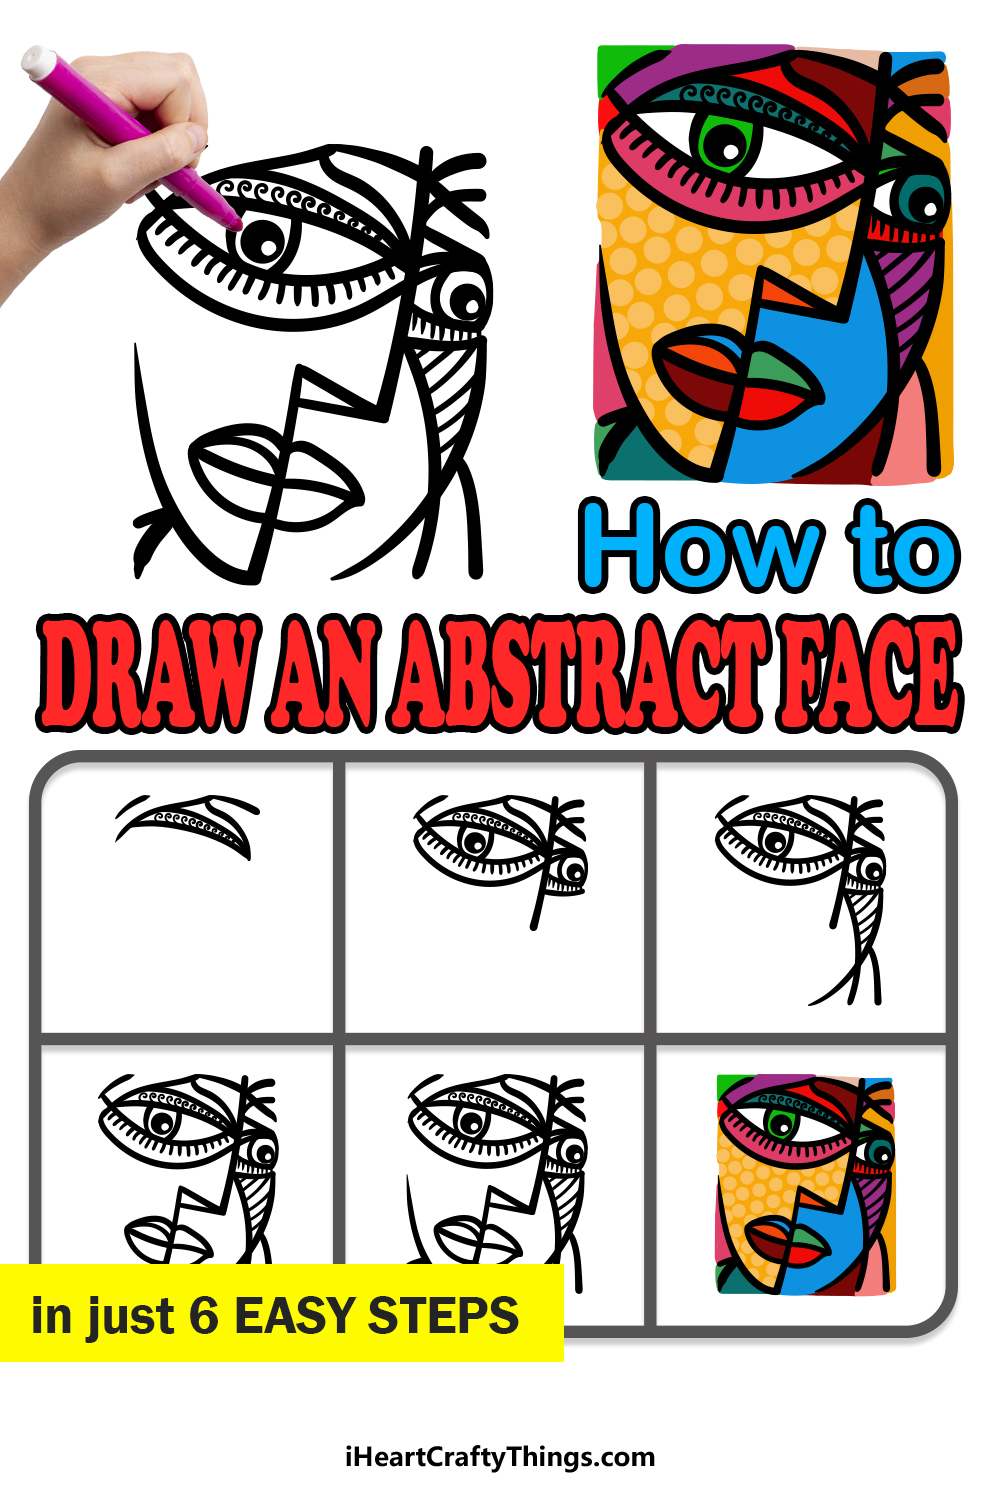 how to draw an Abstract Face in 6 easy steps